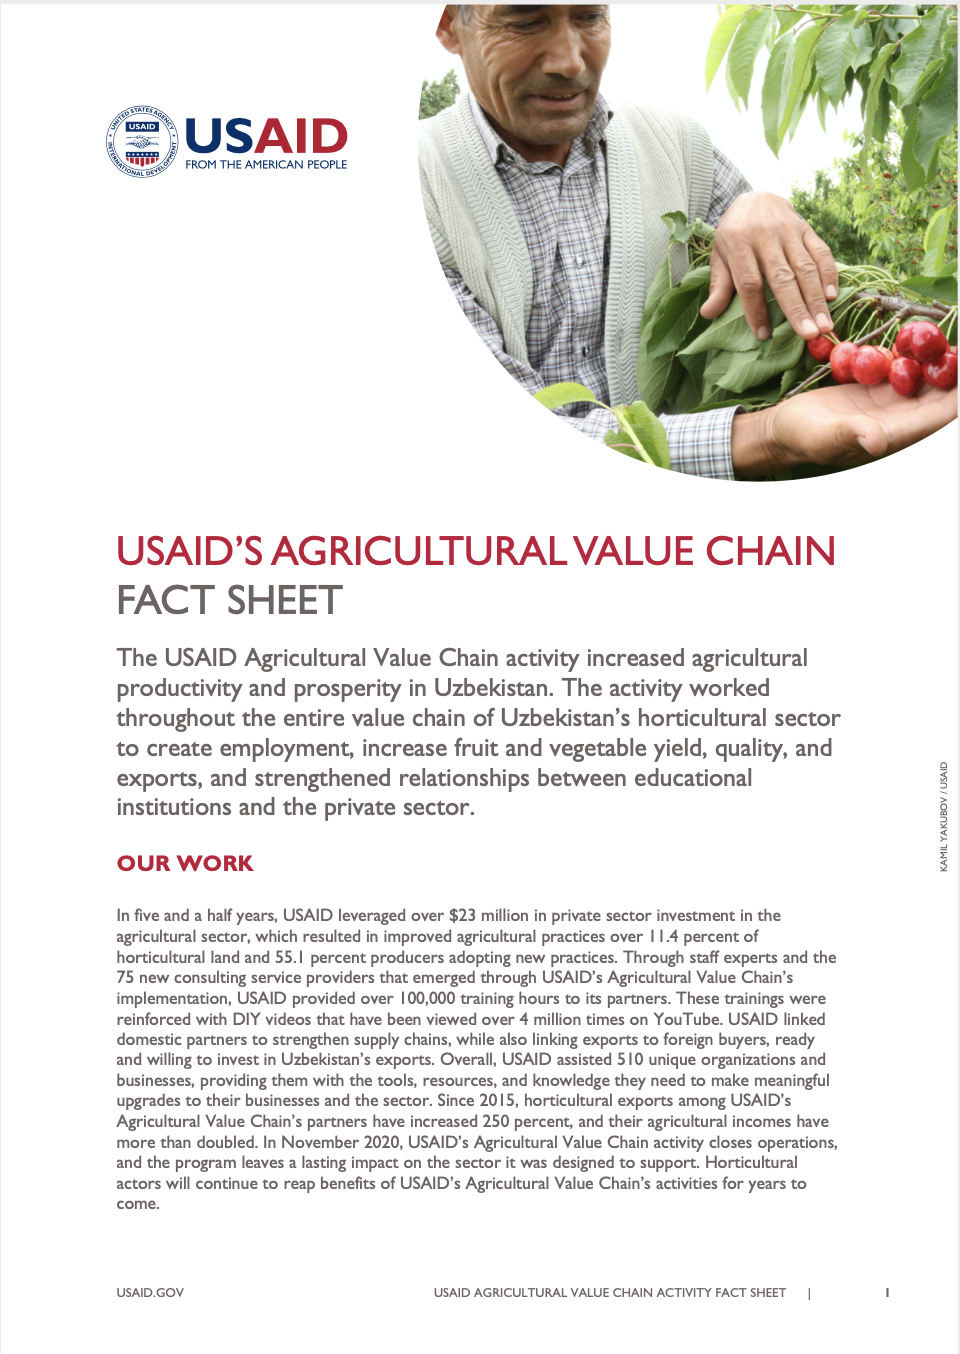 The USAID Agricultural Value Chain activity